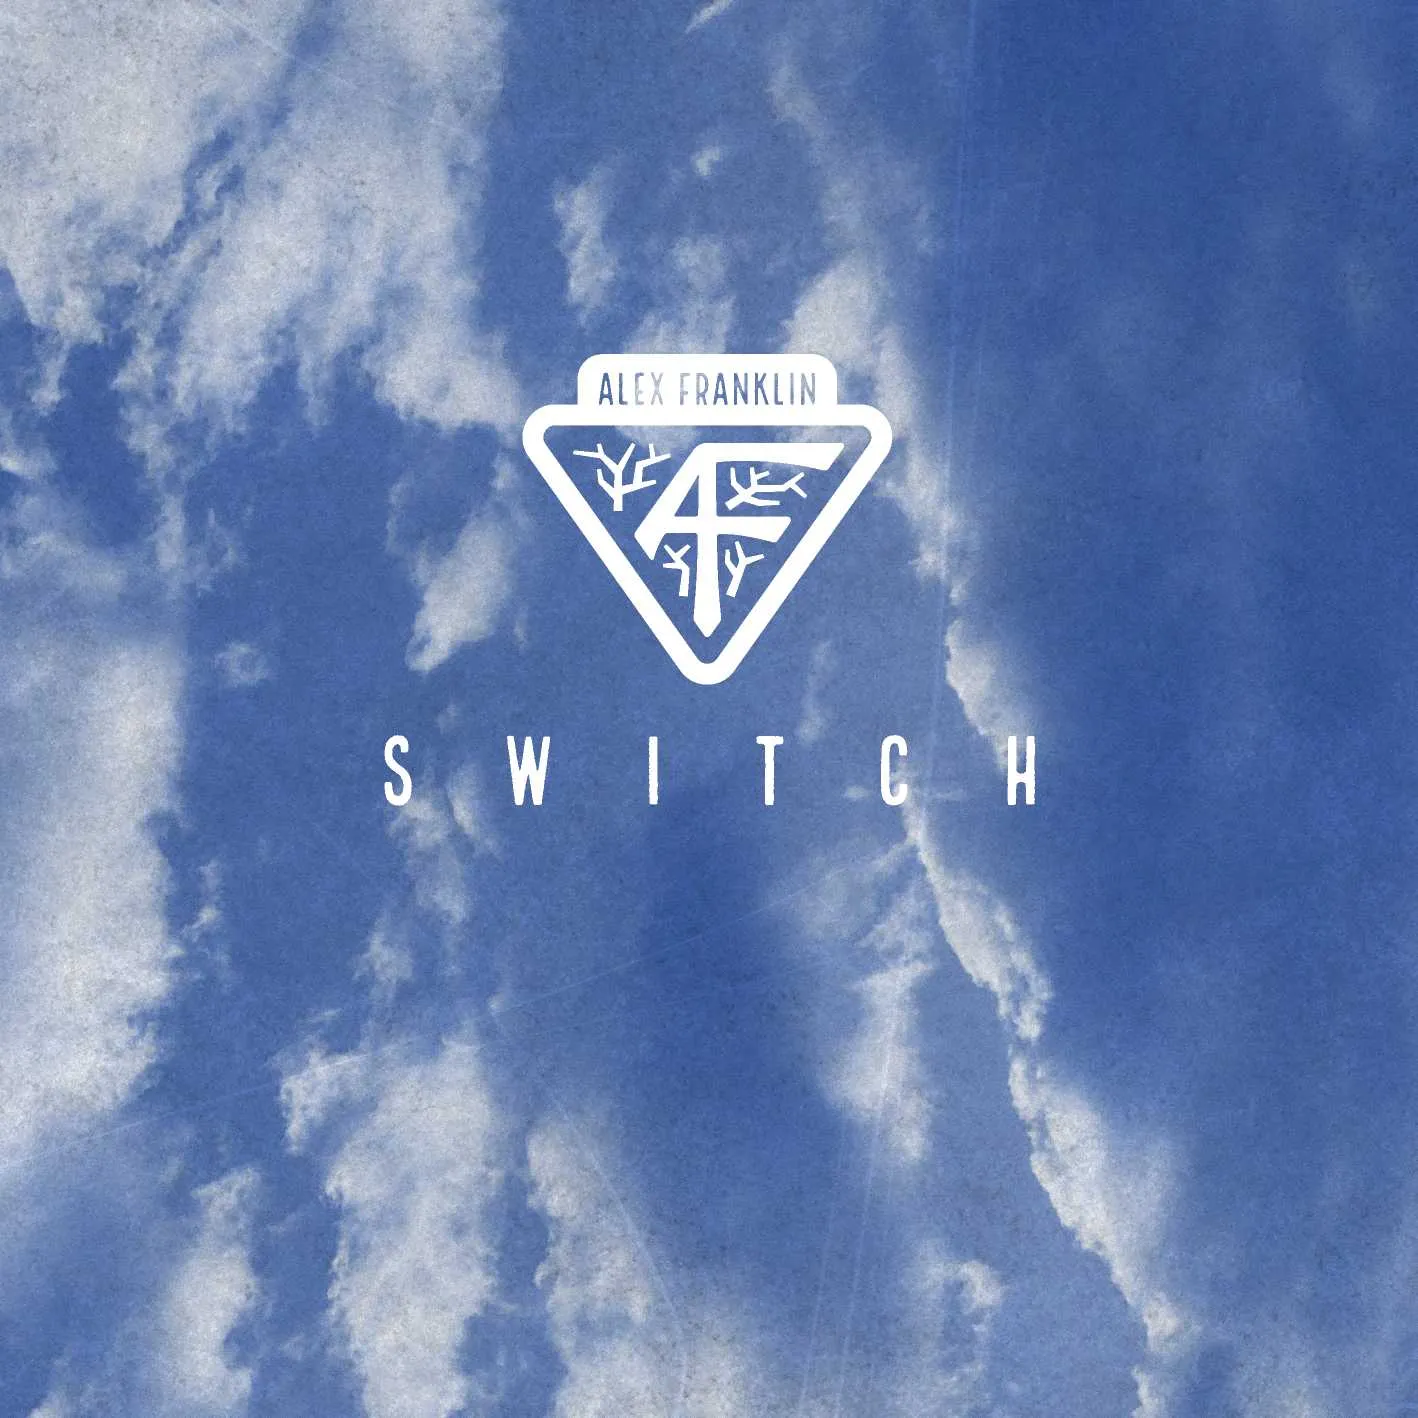 Album cover for “Switch” by Alex Franklin